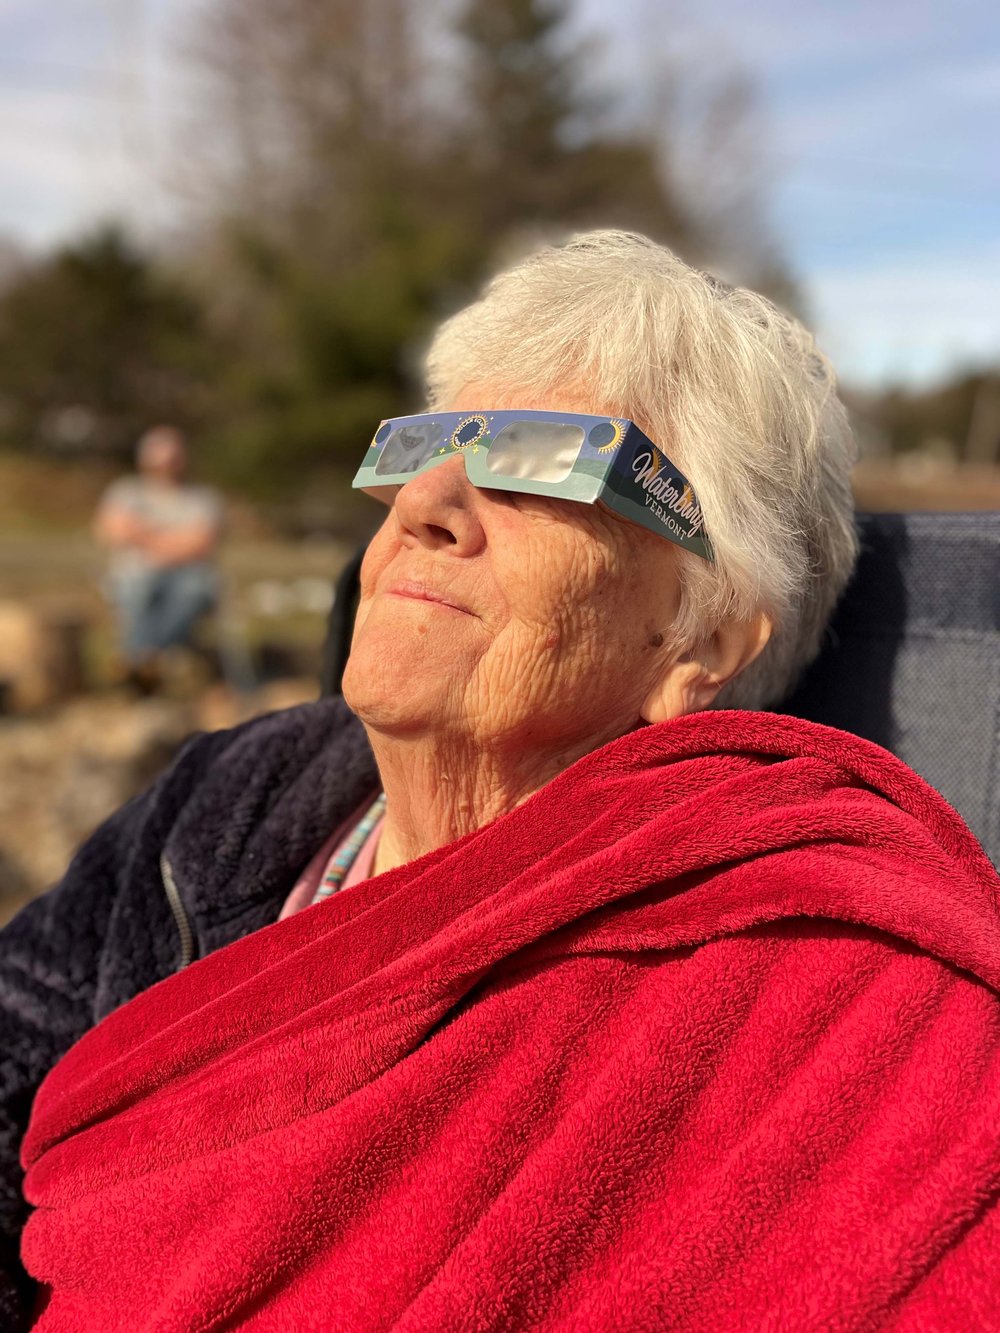   Sharon Fuller takes in the eclipse in Waterbury Center. Photo by Bethany Fuller  